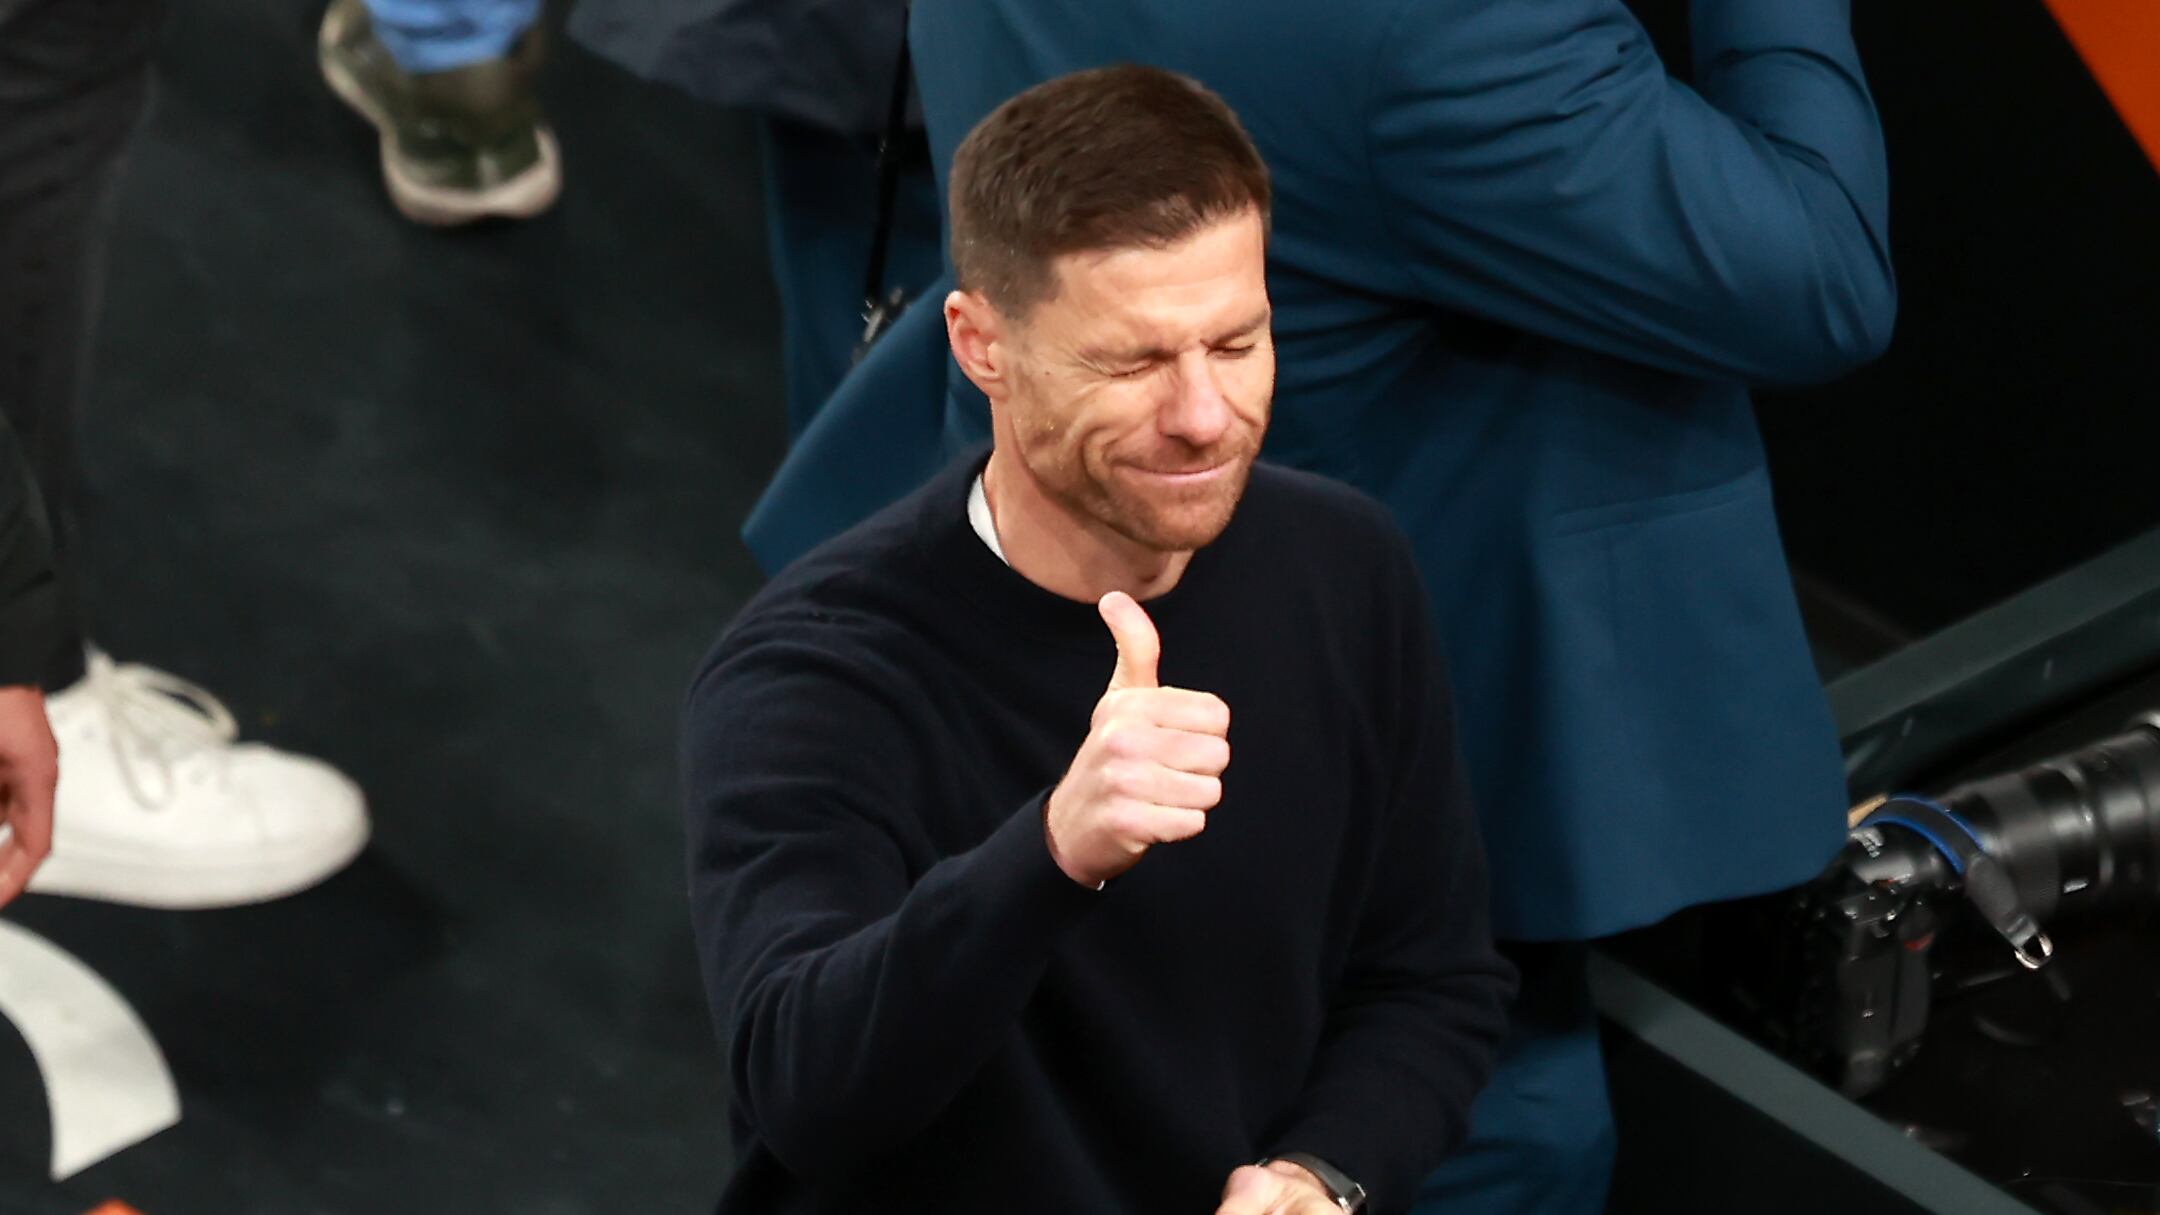 Xabi Alonso guided Bayer Leverkusen to the league and cup double in Germany